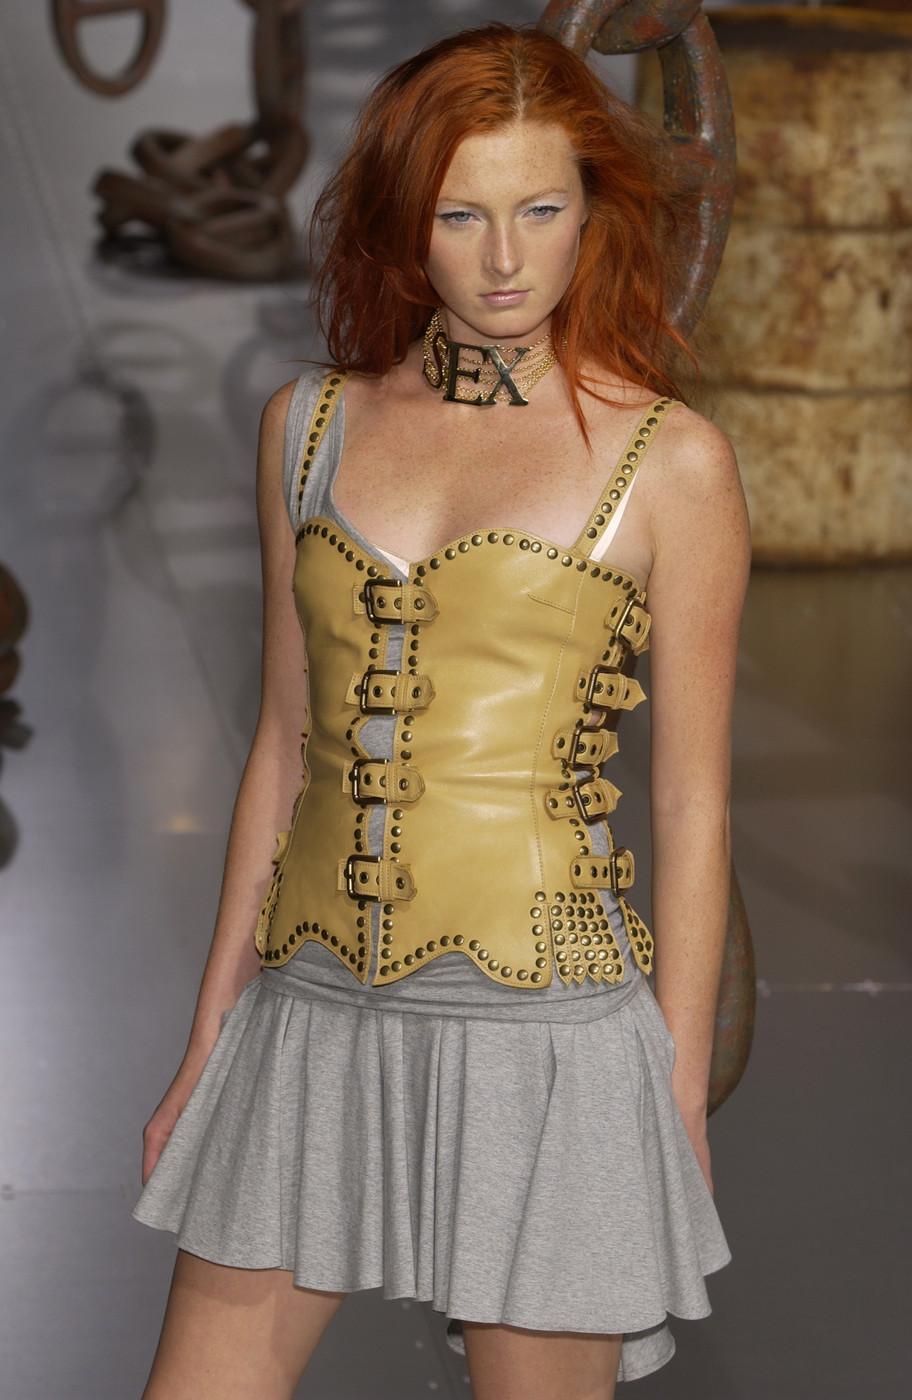 DOLCE & GABBANA Vintage Leather Studded Corset Top 2003 SEX Collection
Neutrals Eyelet & Studded Accents
Sleeveless with Square Neckline Buckle Closure at Side.
Bust: 30